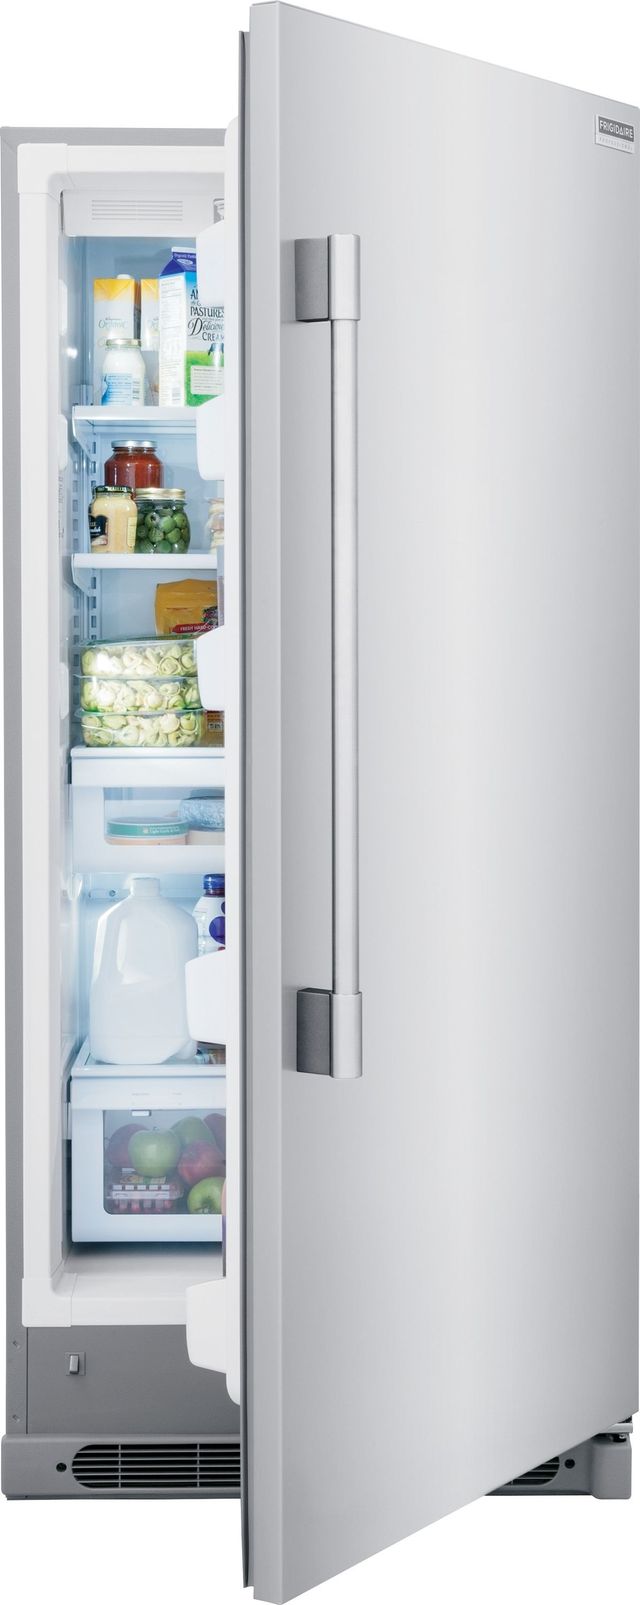 Frigidaire Professional® 18.6 Cu. Ft. Stainless Steel All Refrigerator 2